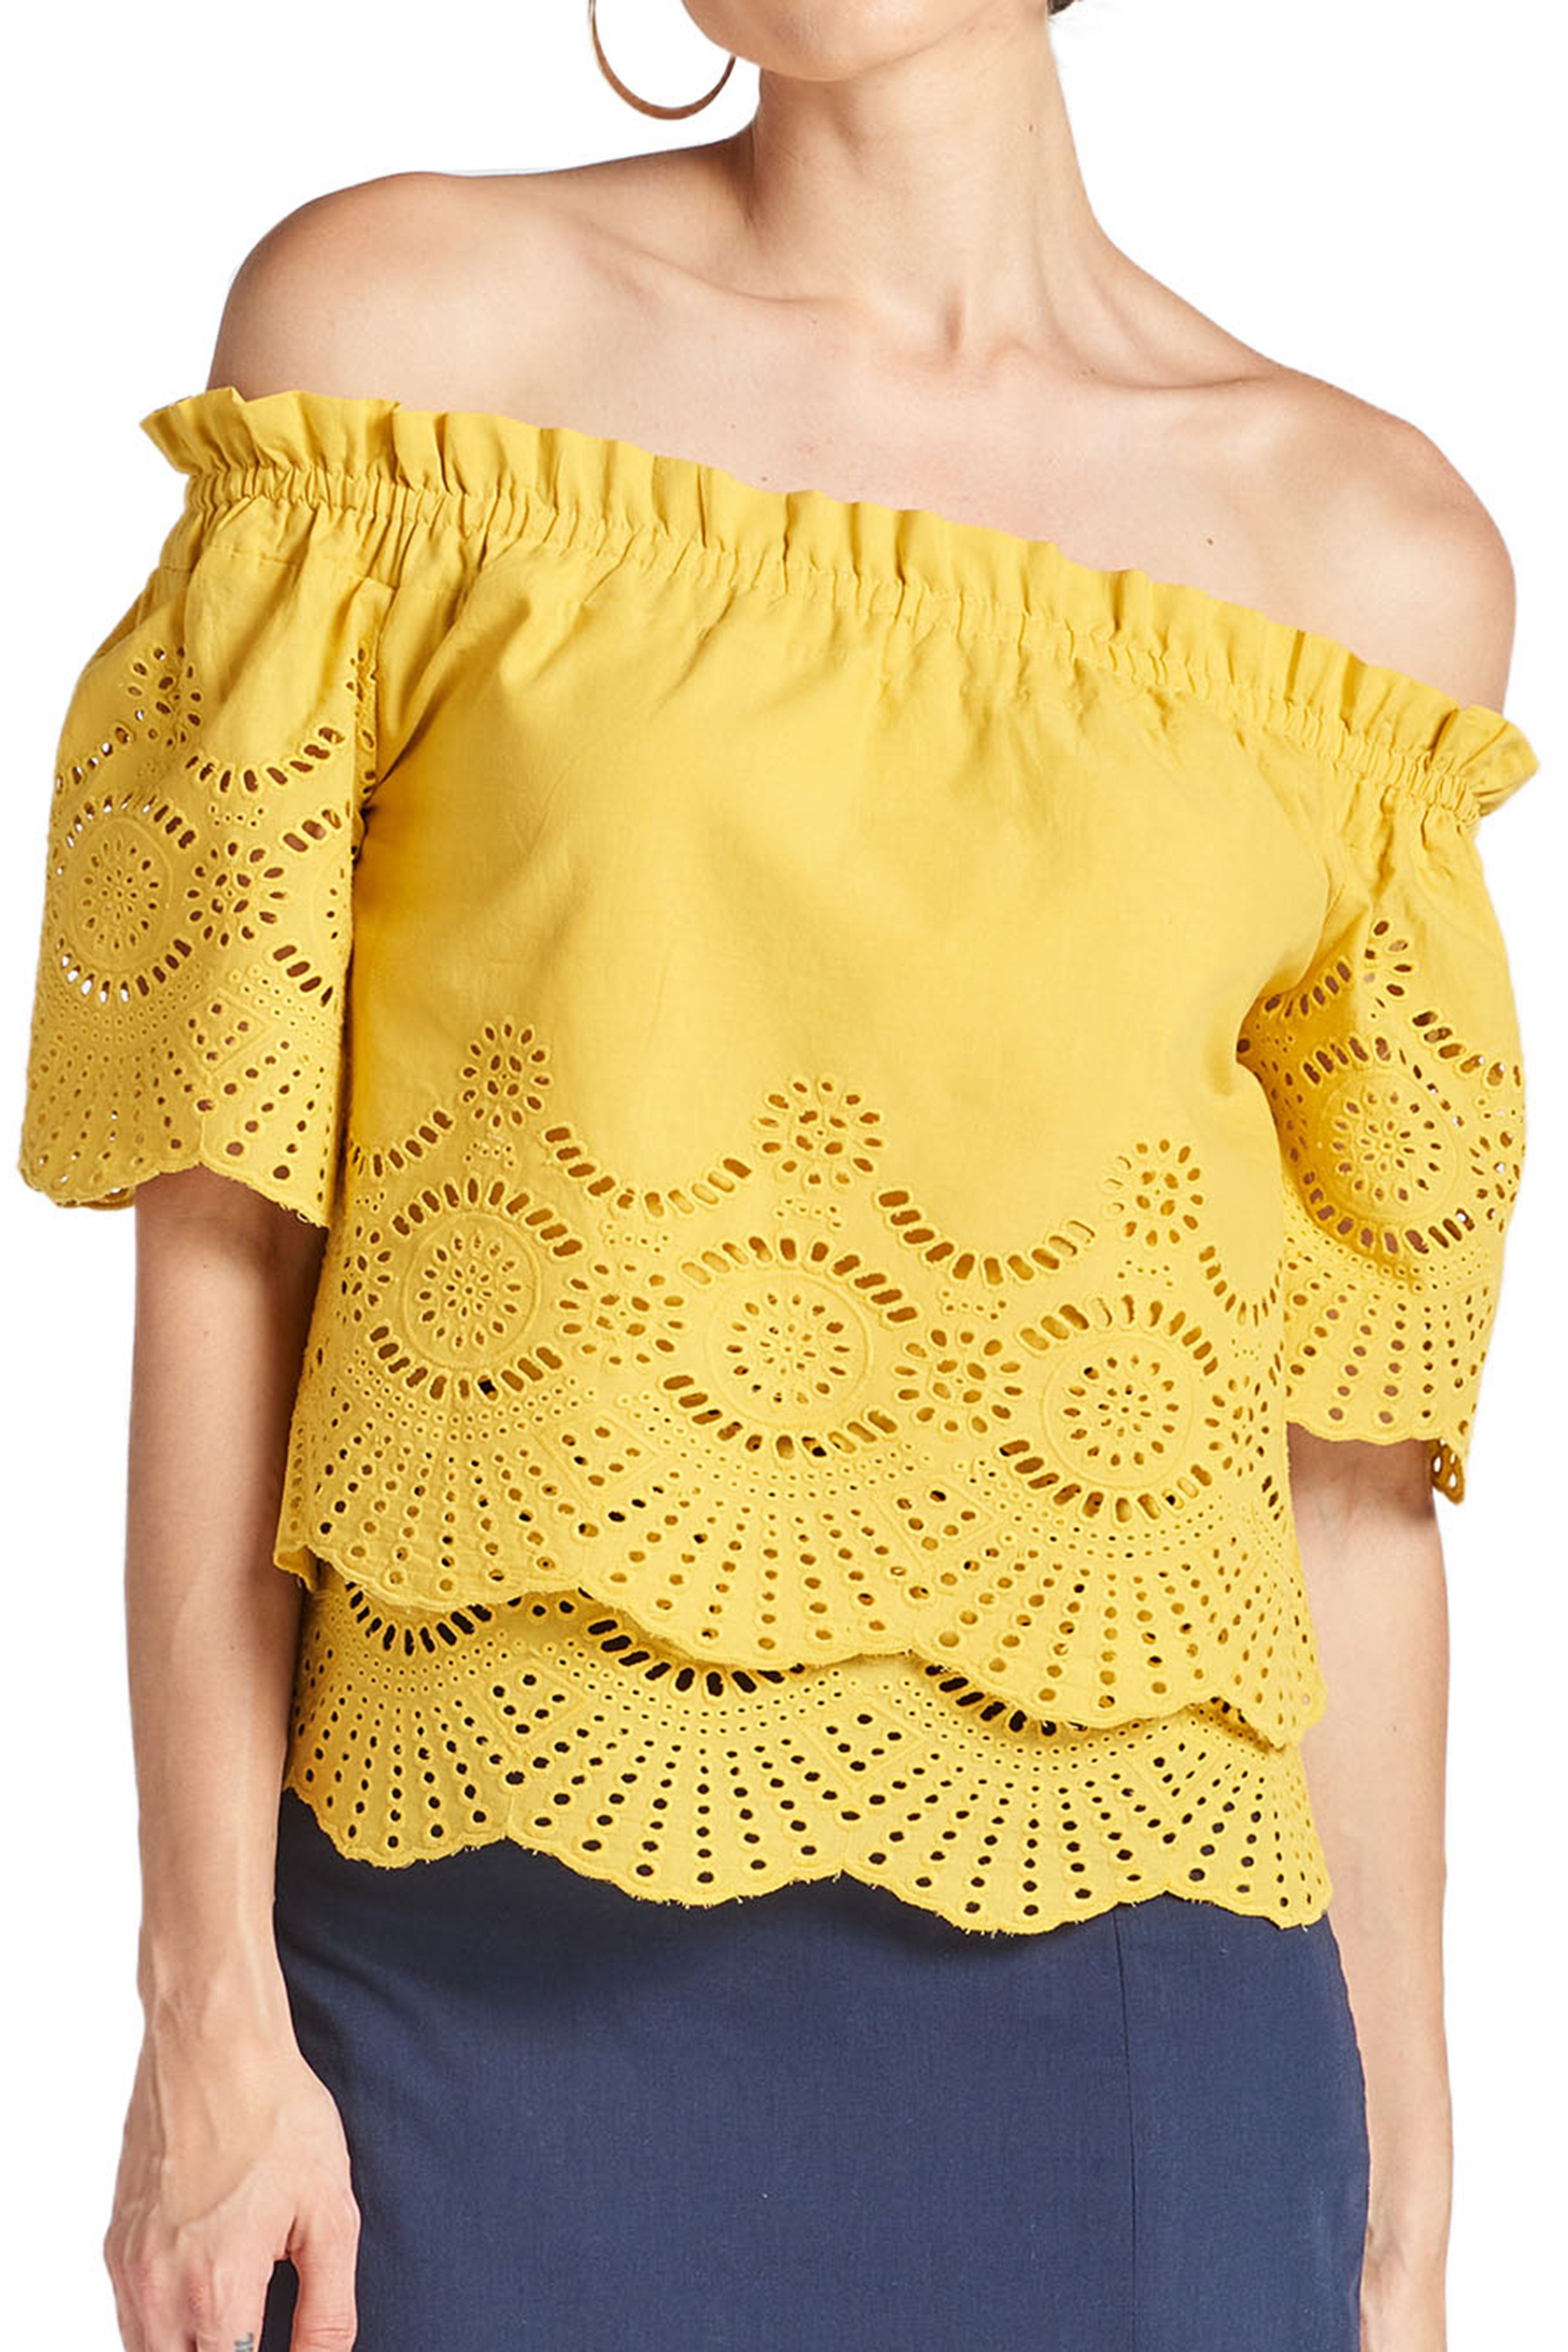 Model wearing yellow off the shoulder cotton eyelet top with scalloped short sleeves and scalloped bottom hem.